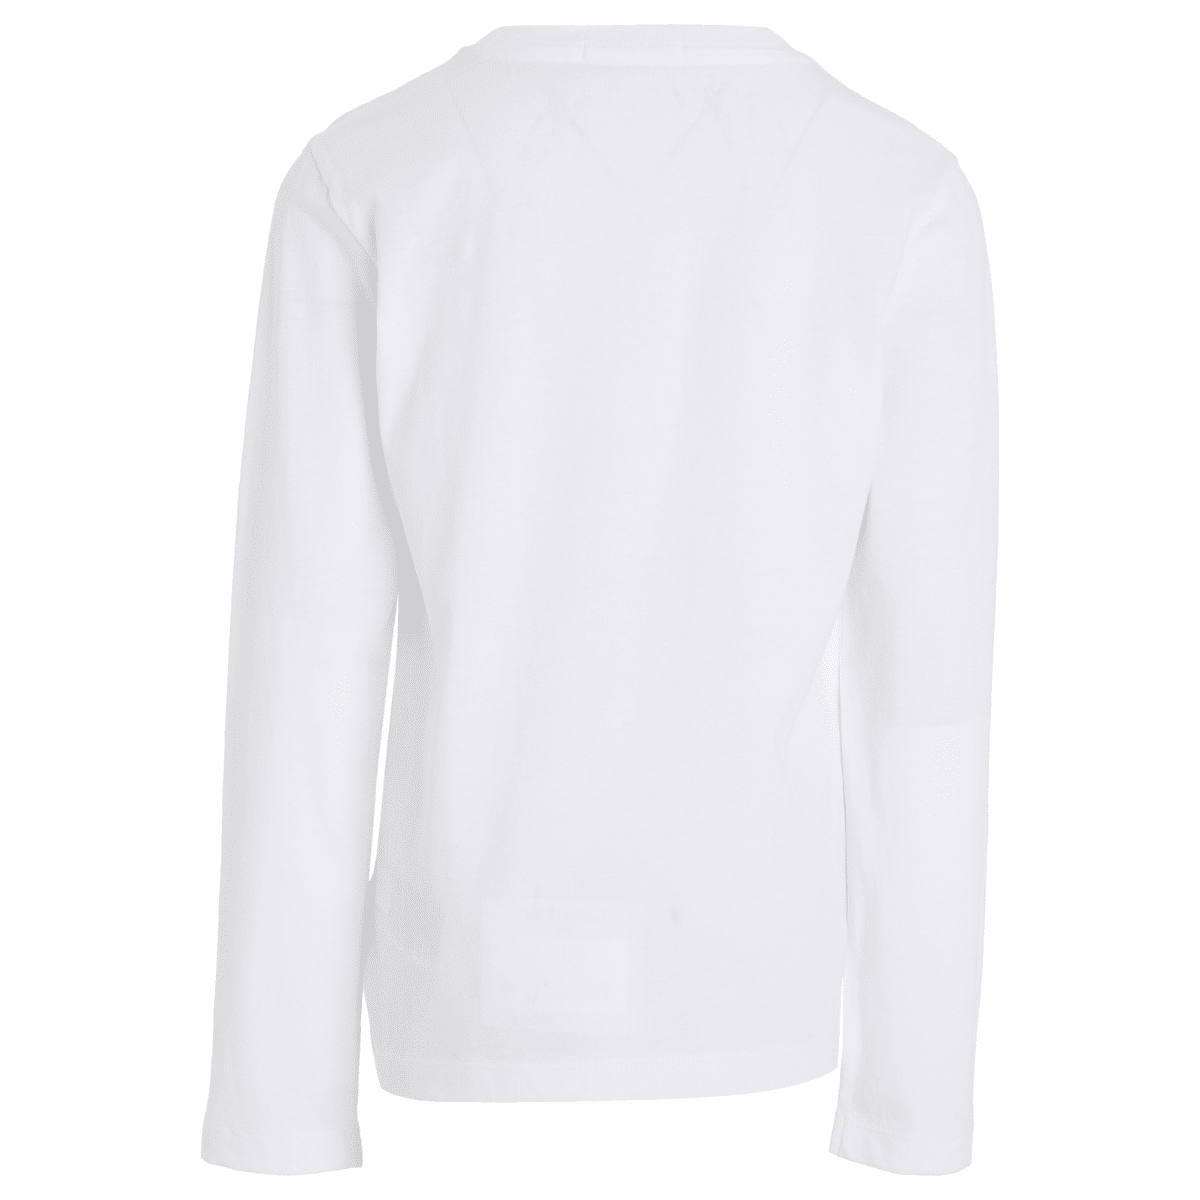 calvin klein childrens white long sleeved top with black logo